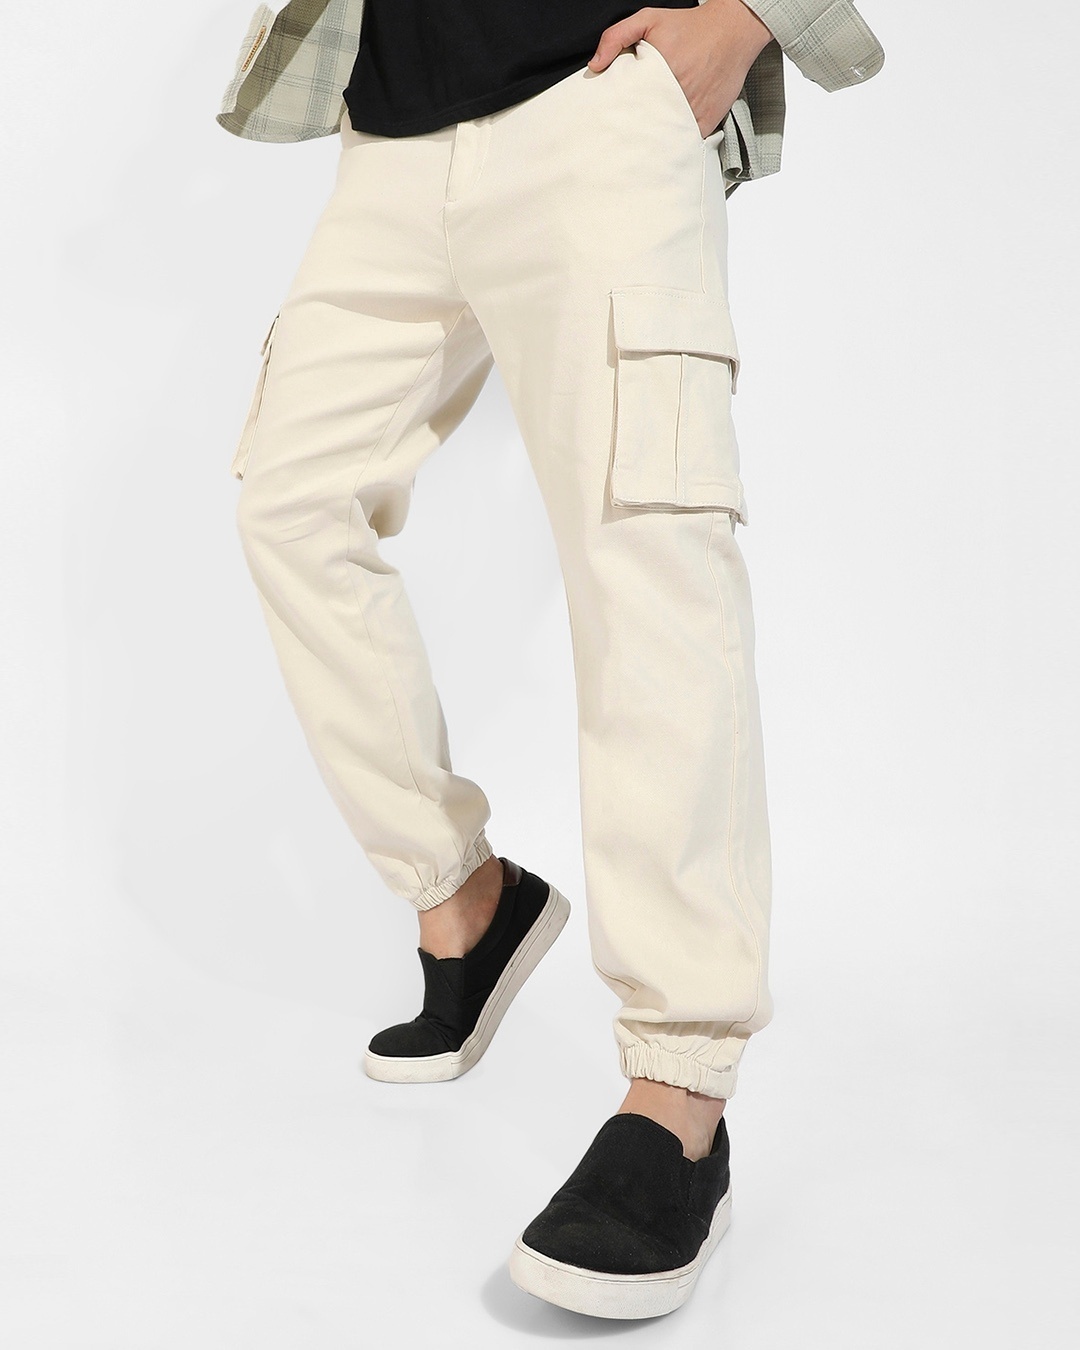 PETER ENGLAND Slim Fit Men Yellow Trousers  Buy MediumkhakiSolid PETER  ENGLAND Slim Fit Men Yellow Trousers Online at Best Prices in India   Flipkartcom